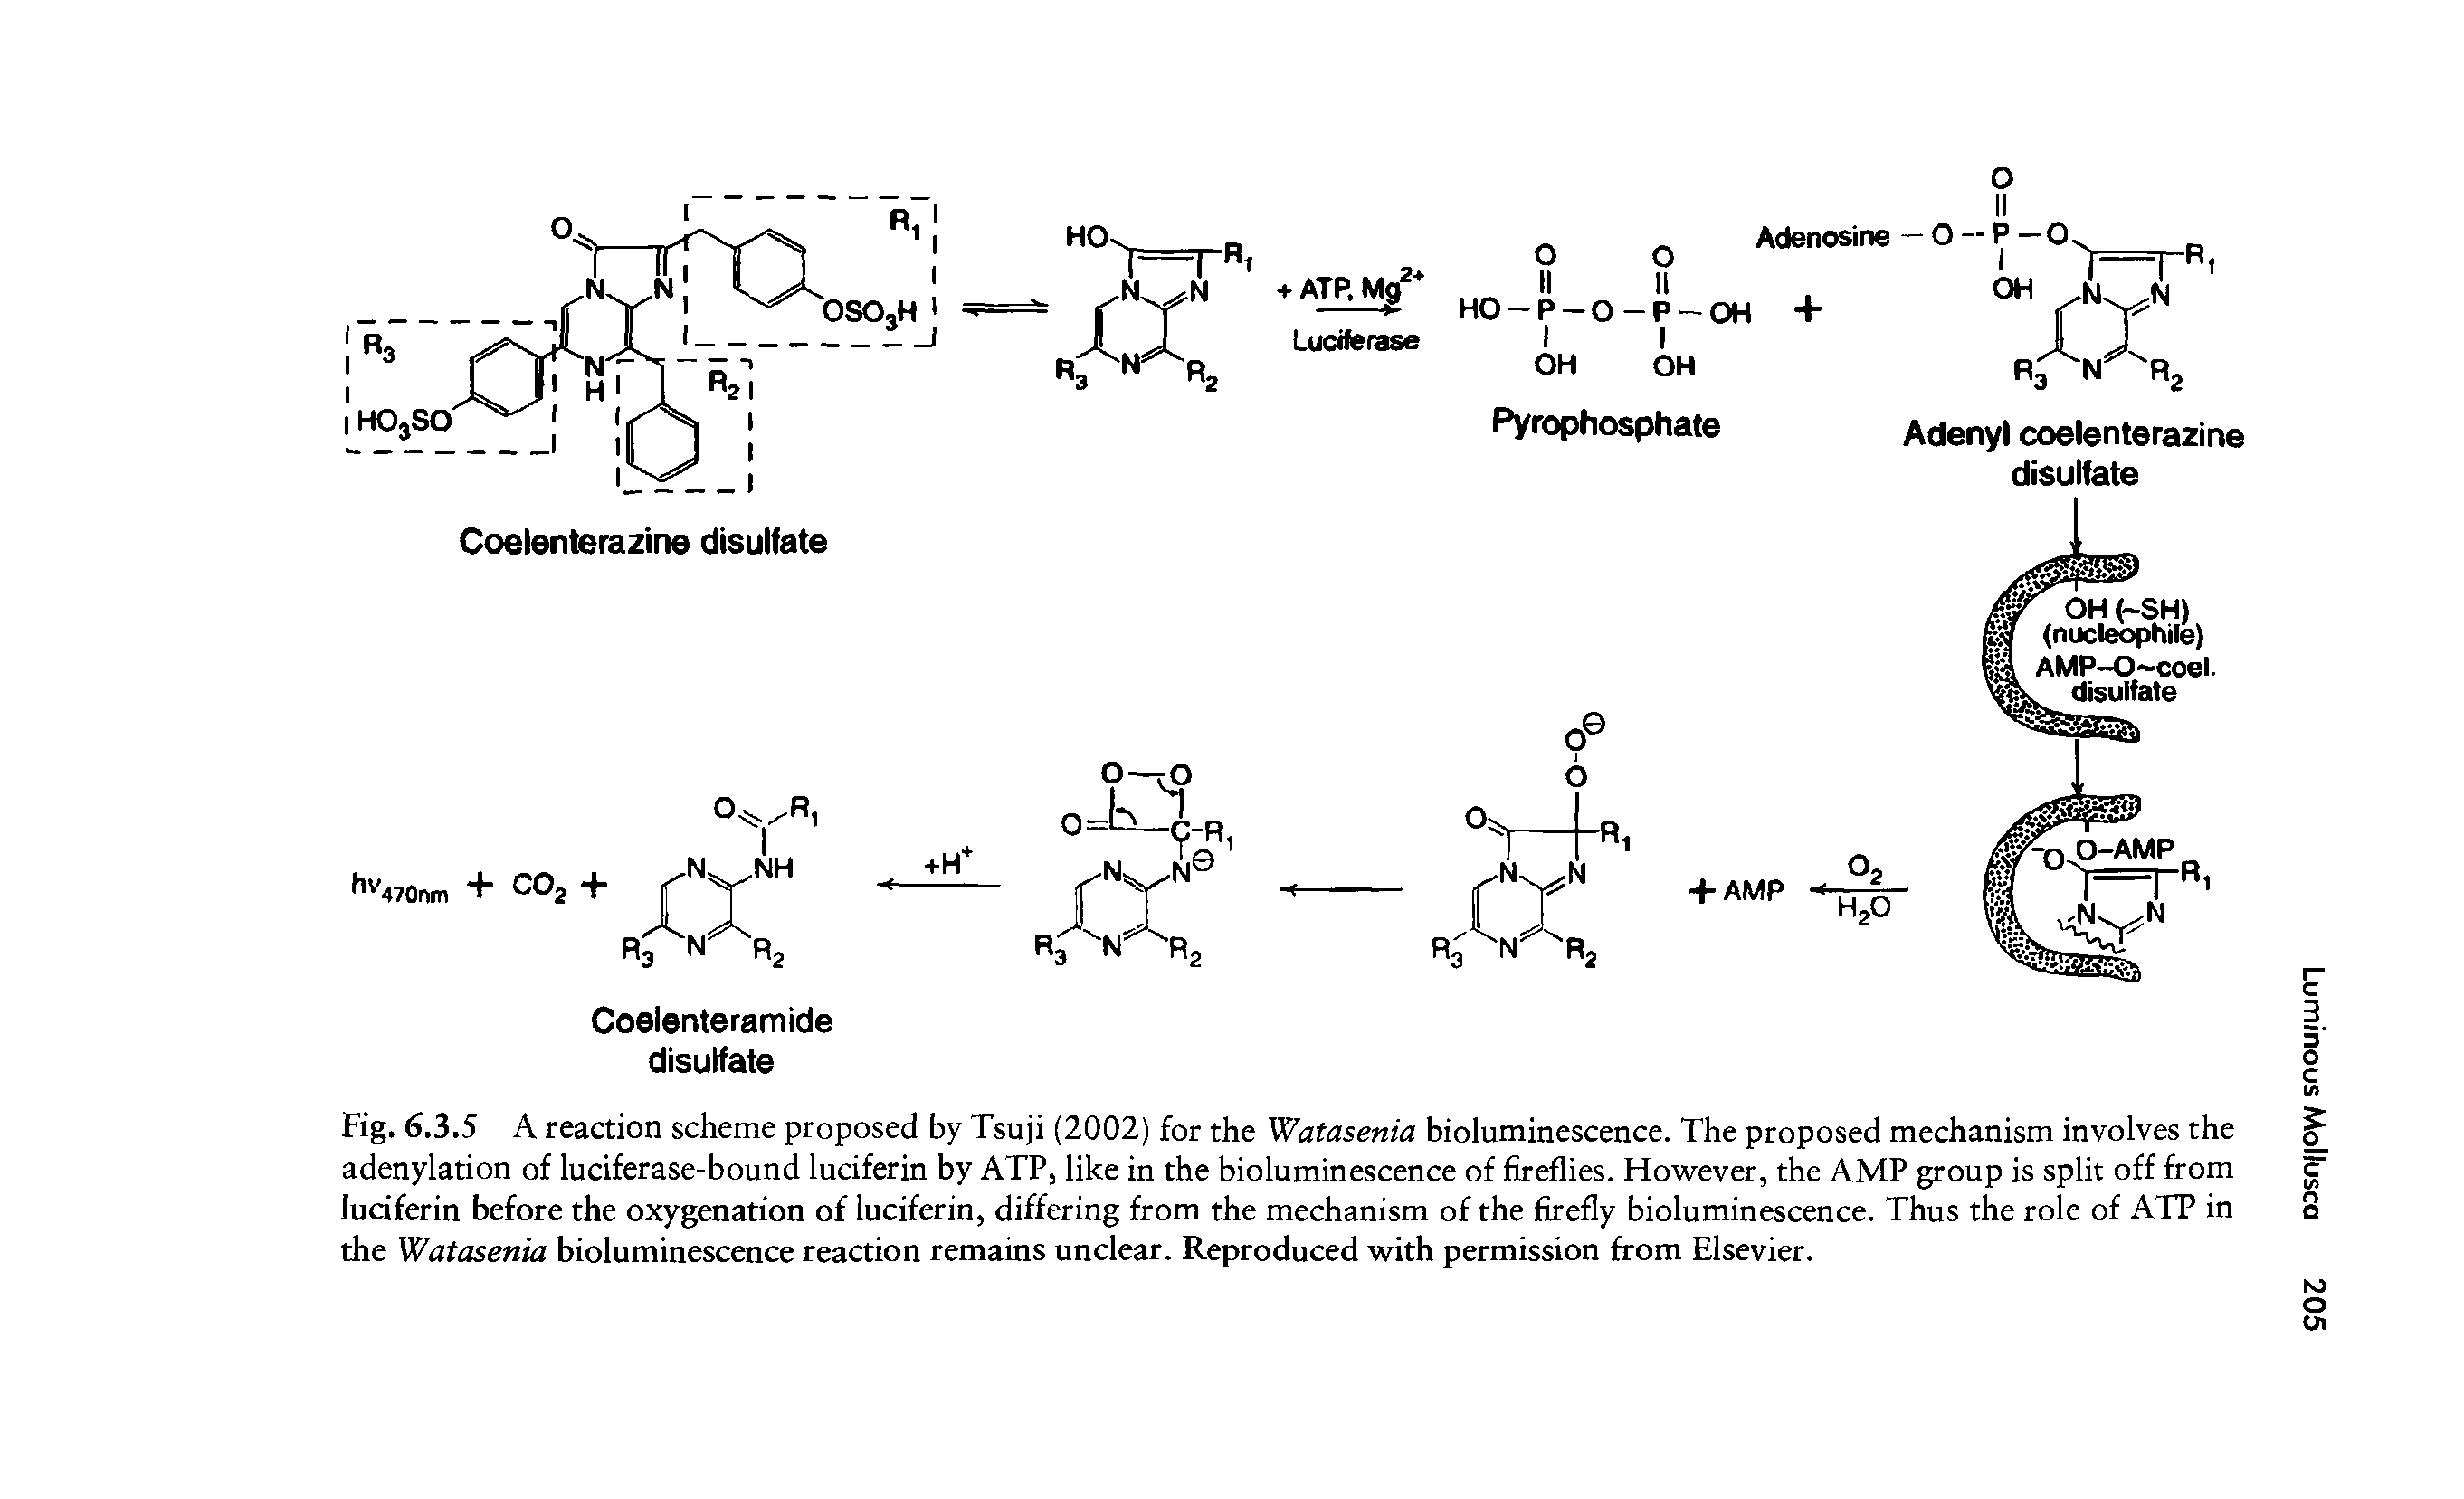 Fig. 6.3.5 A reaction scheme proposed by Tsuji (2002) for the Watasenia bioluminescence. The proposed mechanism involves the adenylation of luciferase-bound luciferin by ATP, like in the bioluminescence of fireflies. However, the AMP group is split off from luciferin before the oxygenation of luciferin, differing from the mechanism of the firefly bioluminescence. Thus the role of ATP in the Watasenia bioluminescence reaction remains unclear. Reproduced with permission from Elsevier.